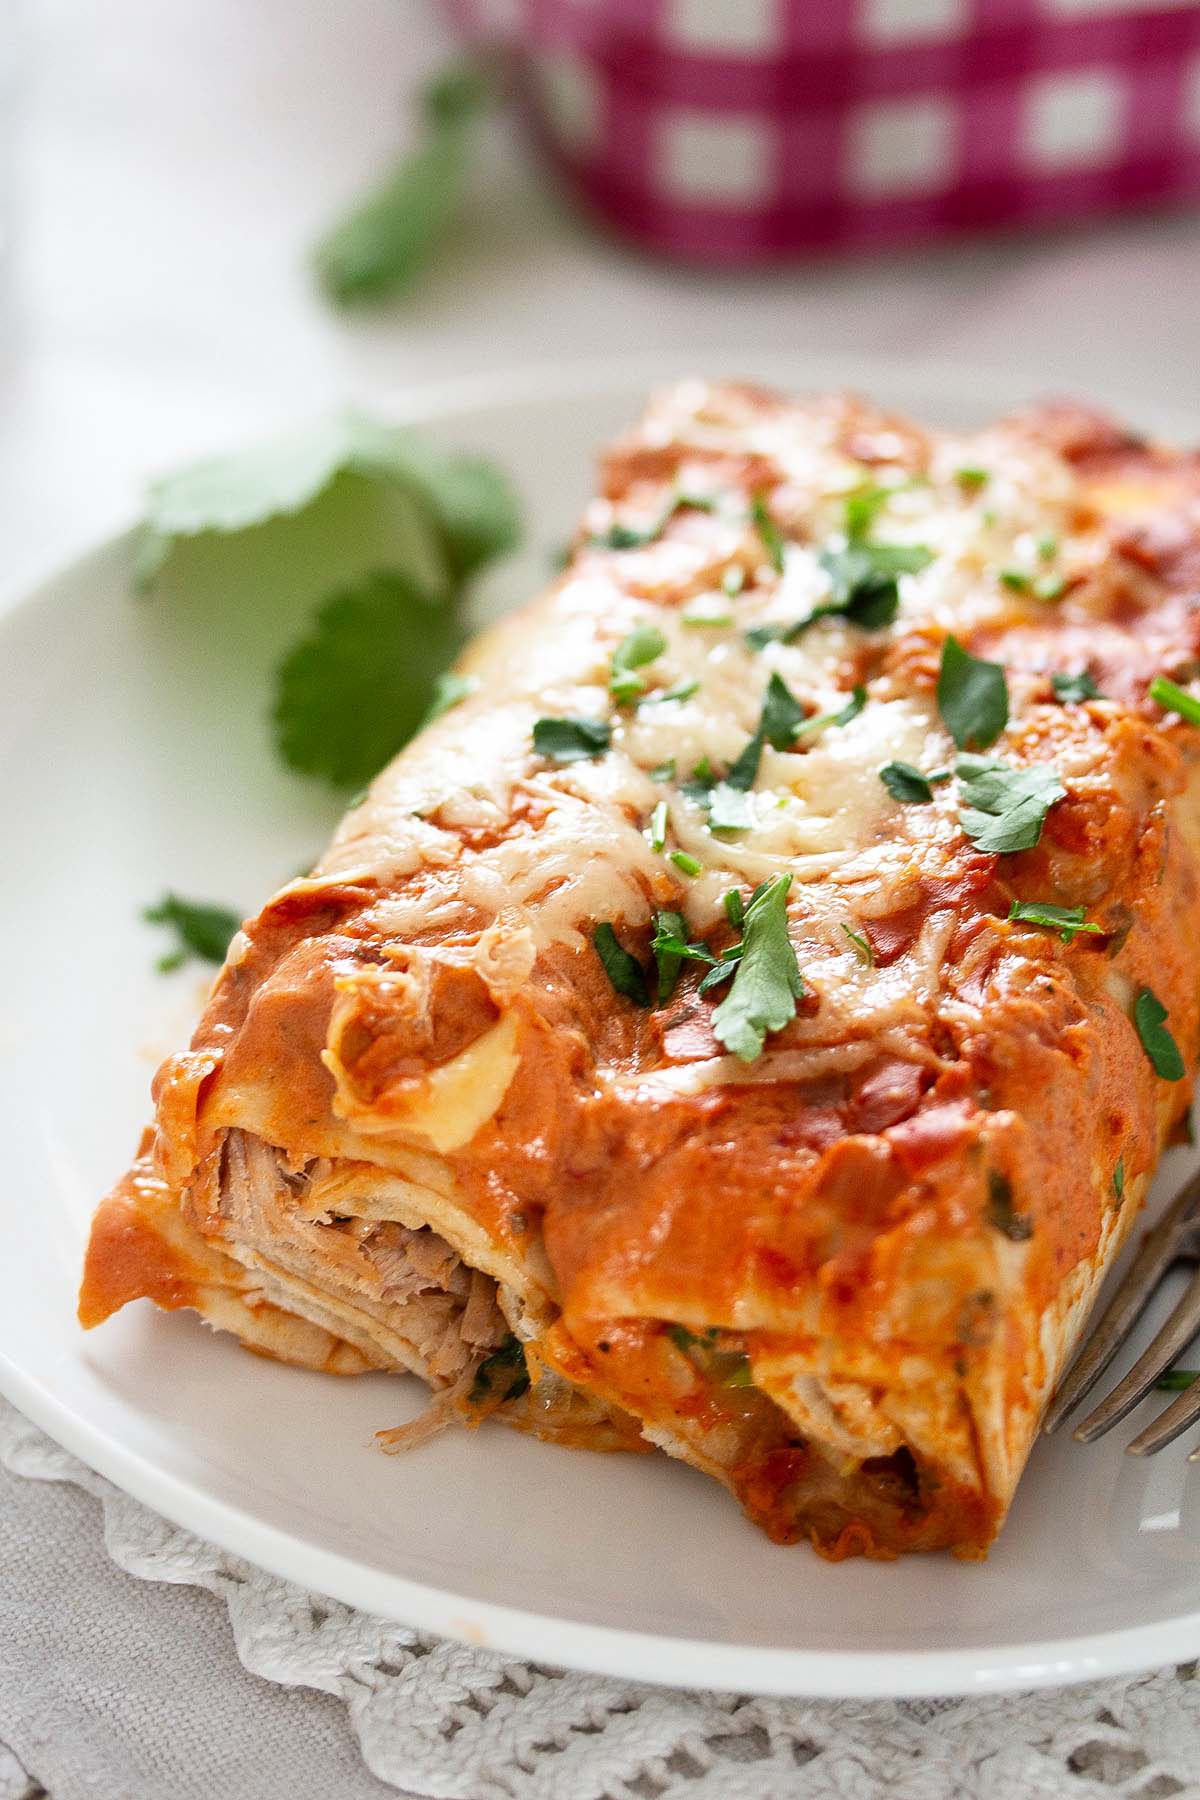 two large chicken enchiladas cooked in sour cream red sauce and sprinkled with cheese and cilantro.